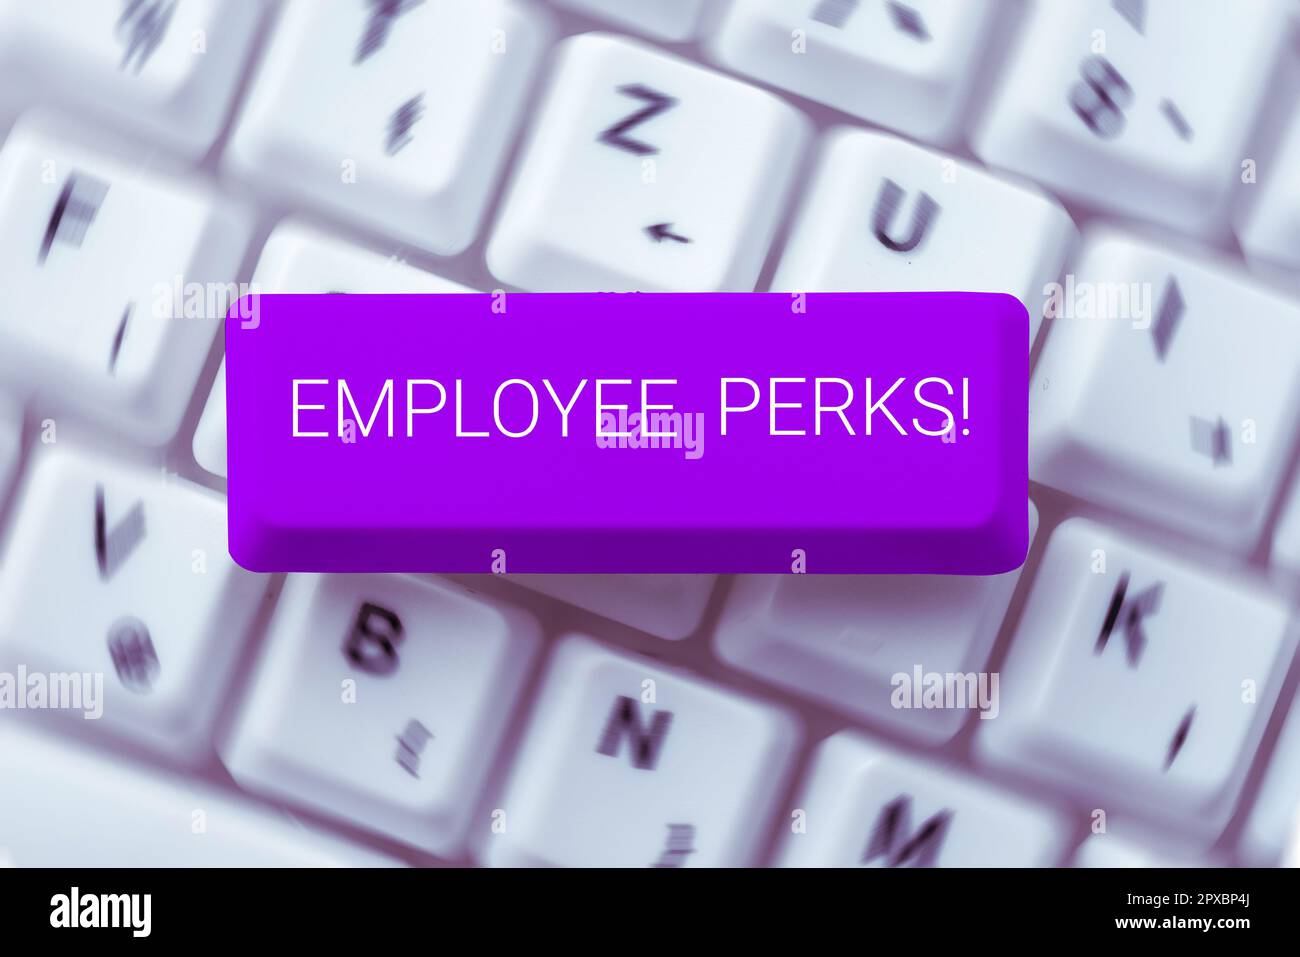 Sign displaying Employee Perks, Business overview Worker Benefits Bonuses Compensation Rewards Health Insurance Stock Photo